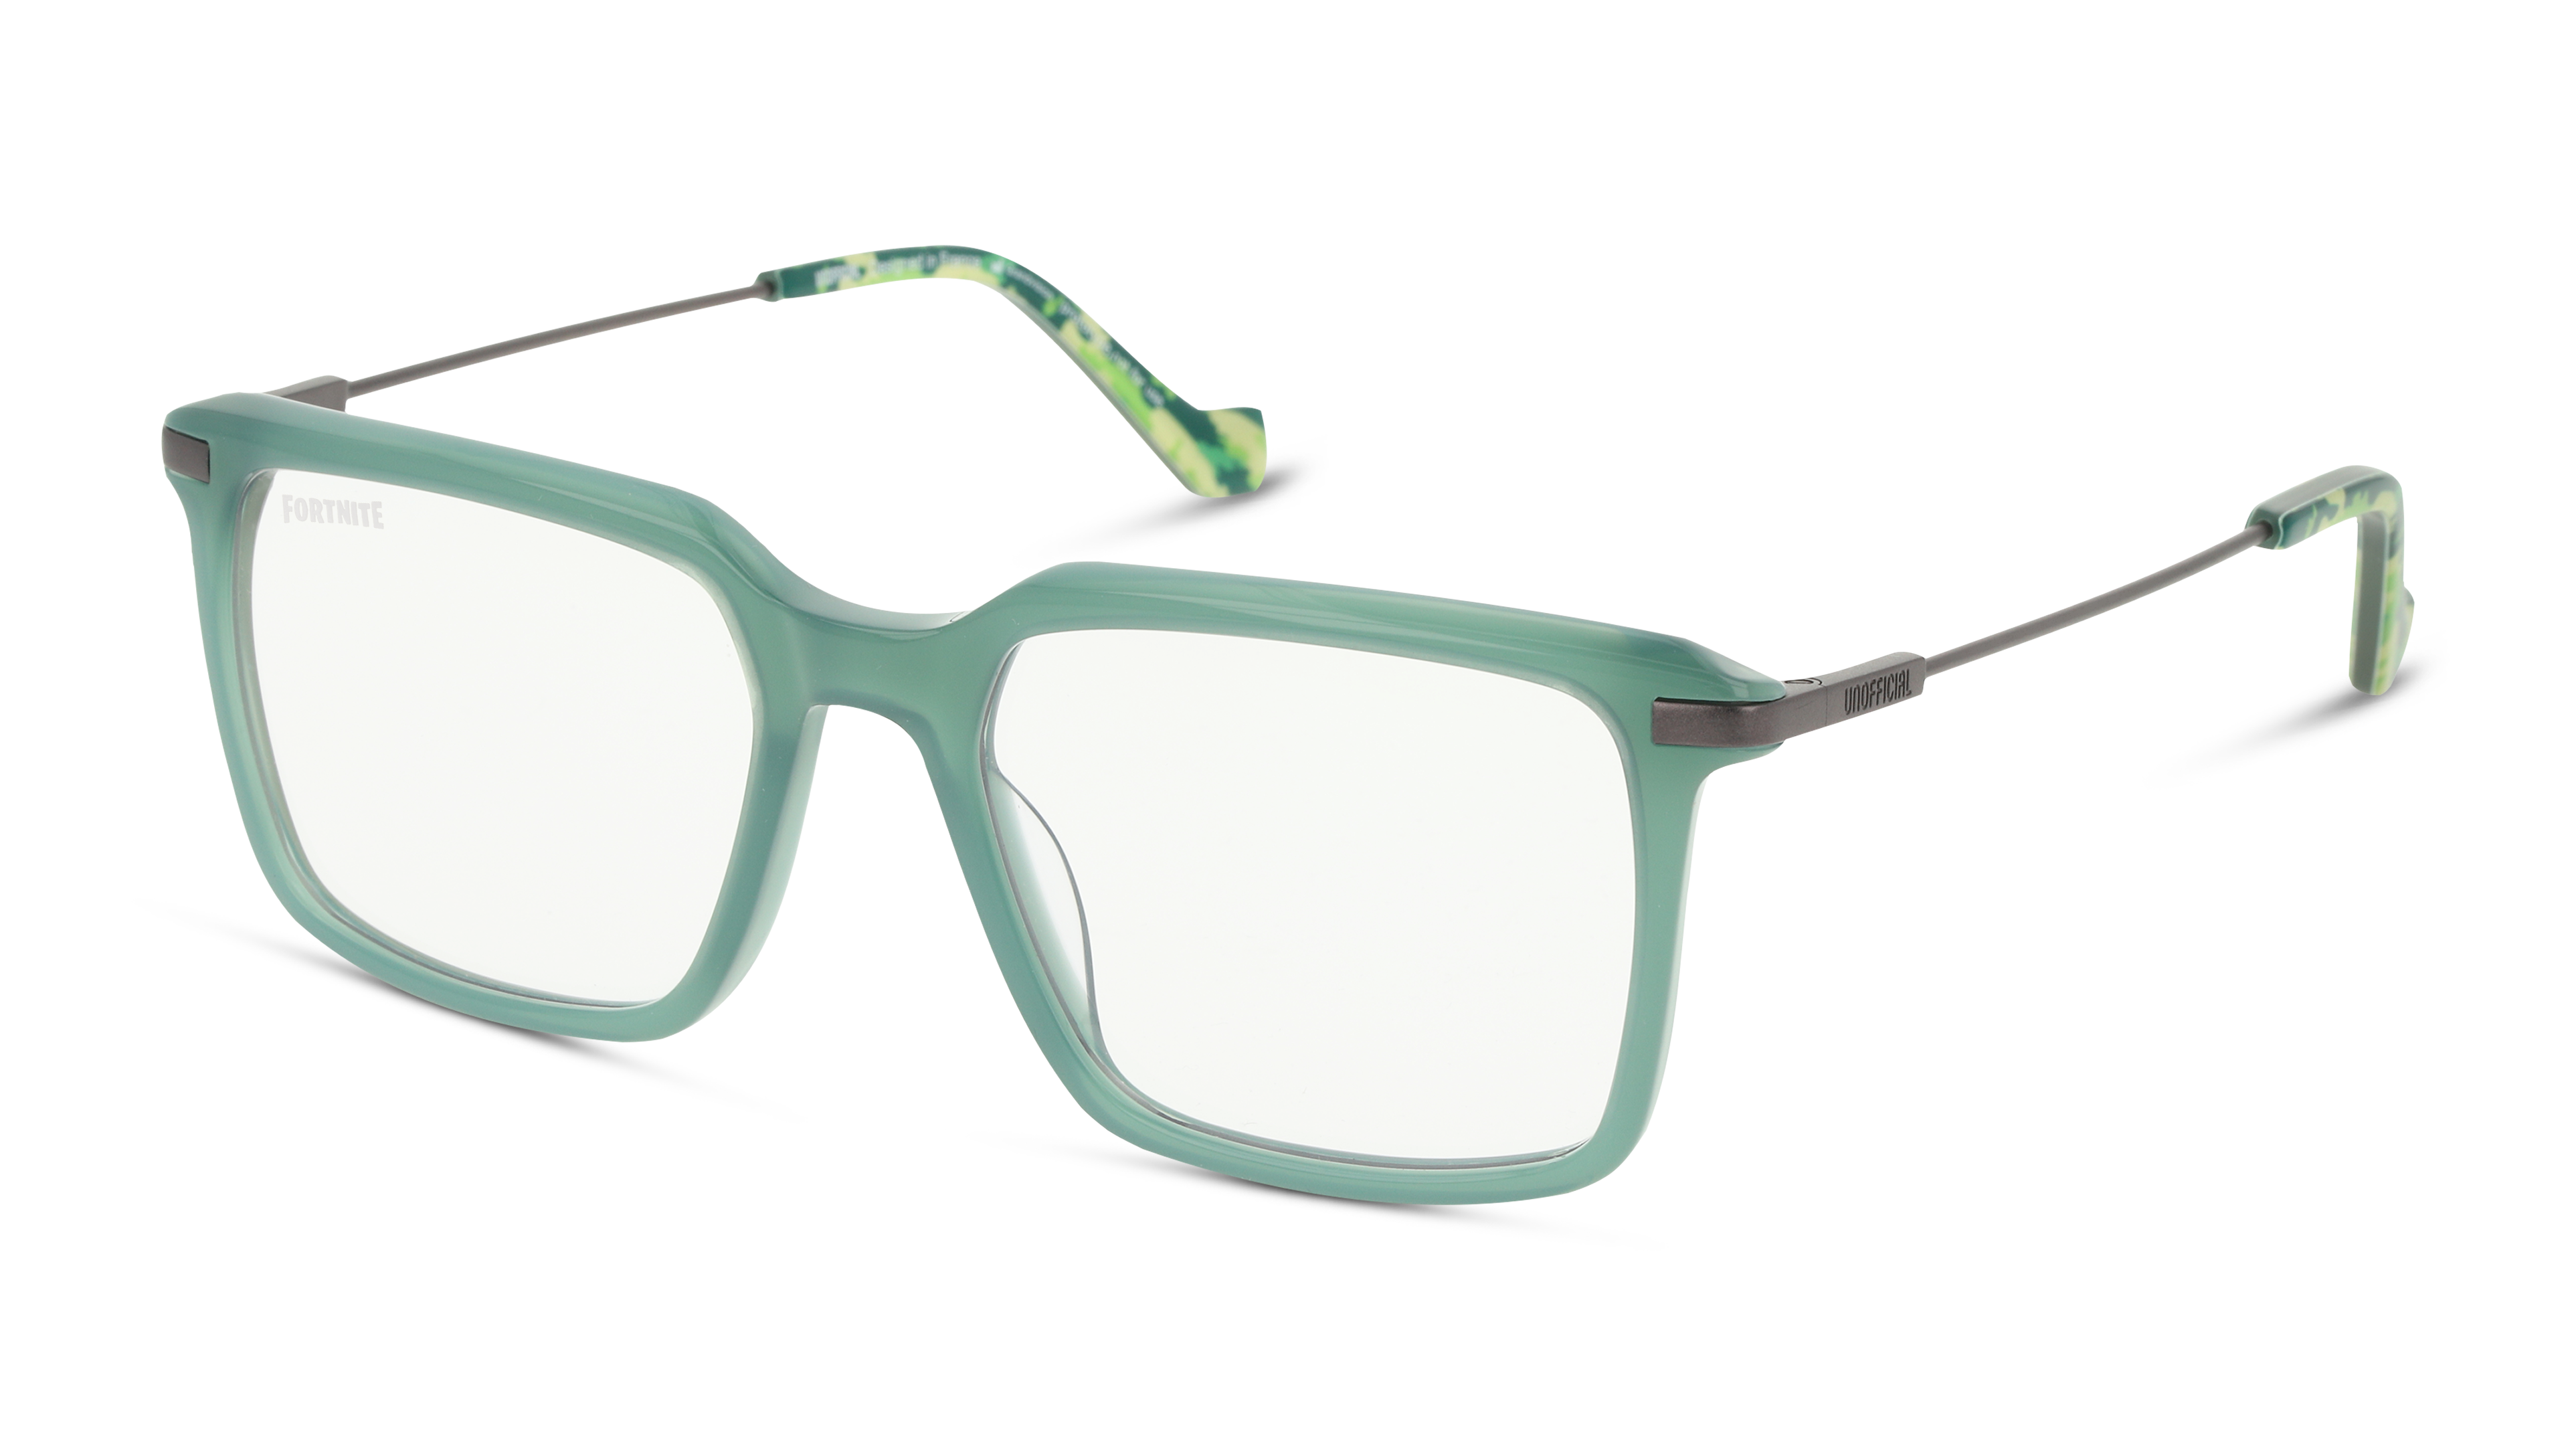 Angle_Left01 Fortnite with Unofficial UNSU0164 Glasses Transparent / Green